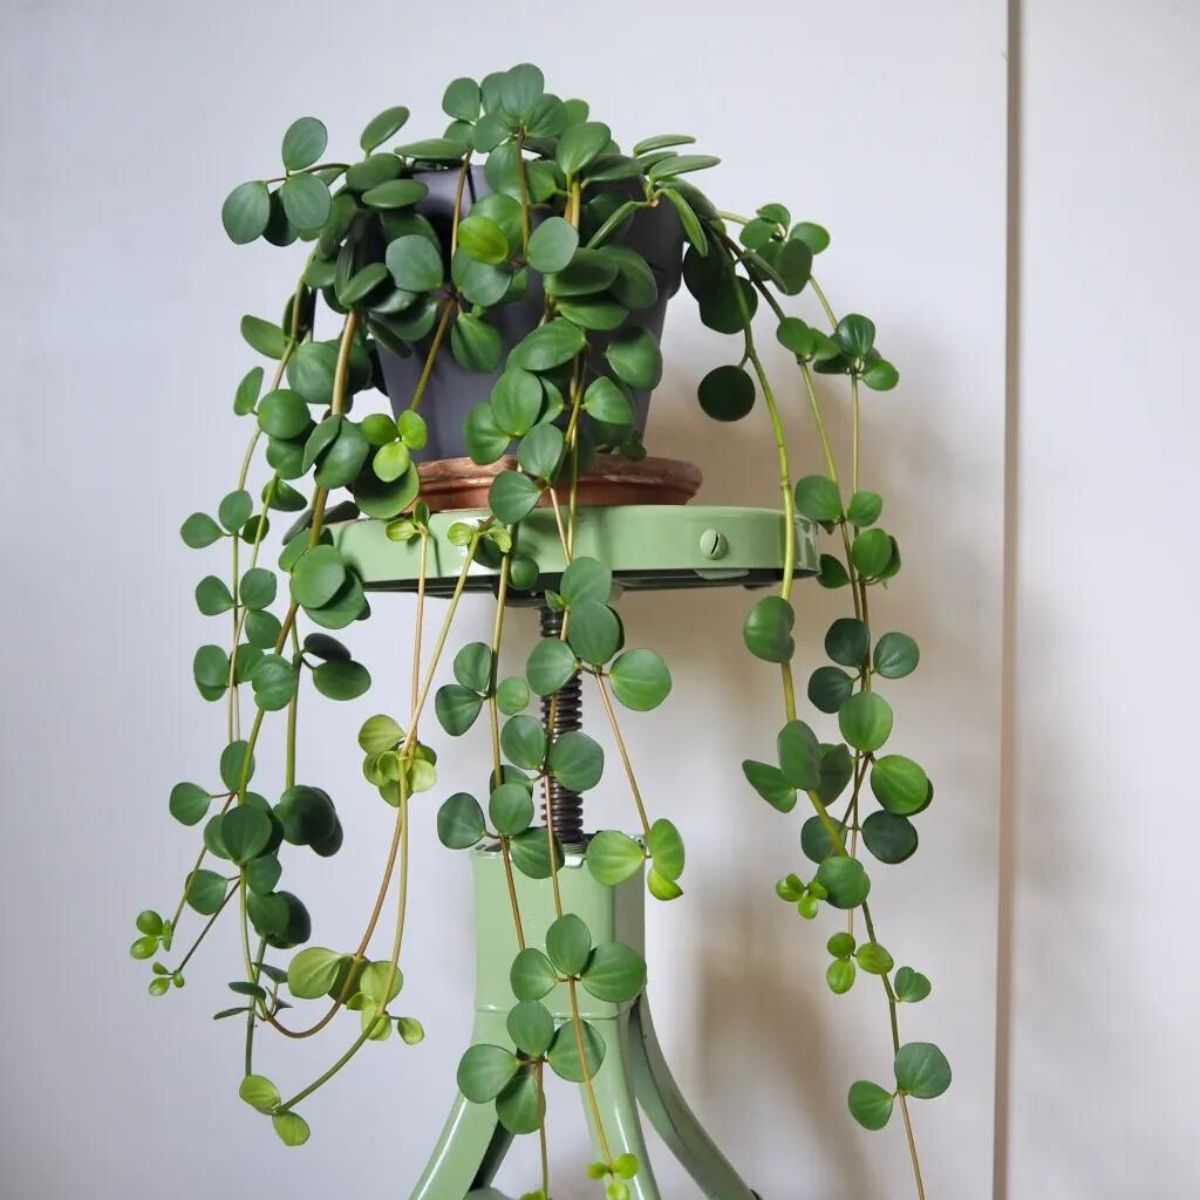 Plant stories about Peperomia